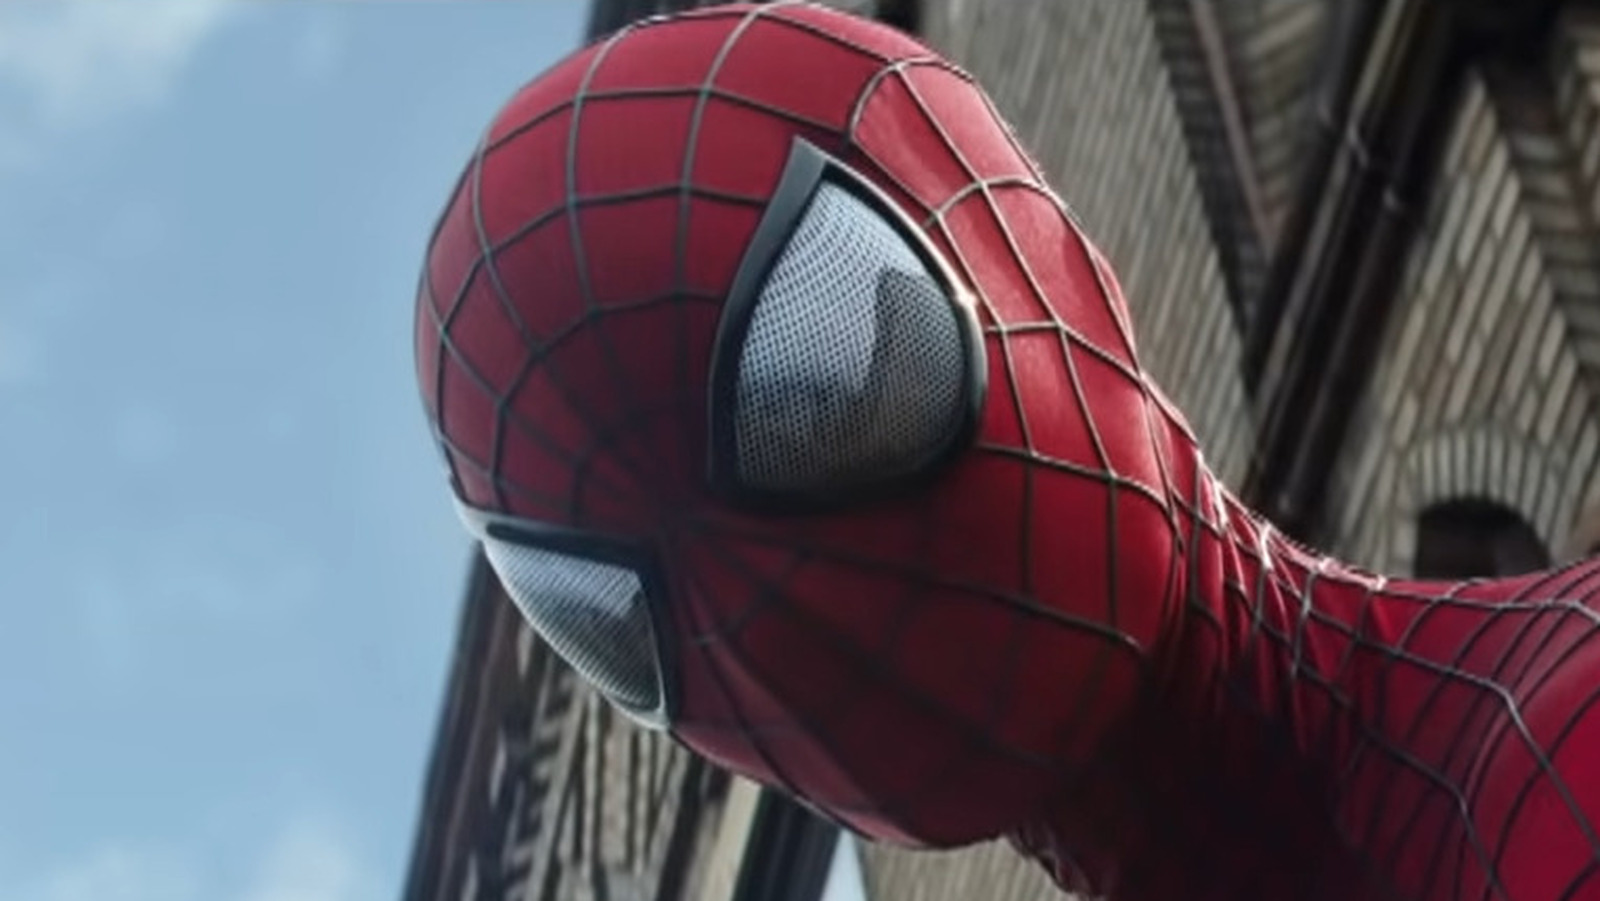 What You Don't Know About Andrew Garfield's Spider-Man